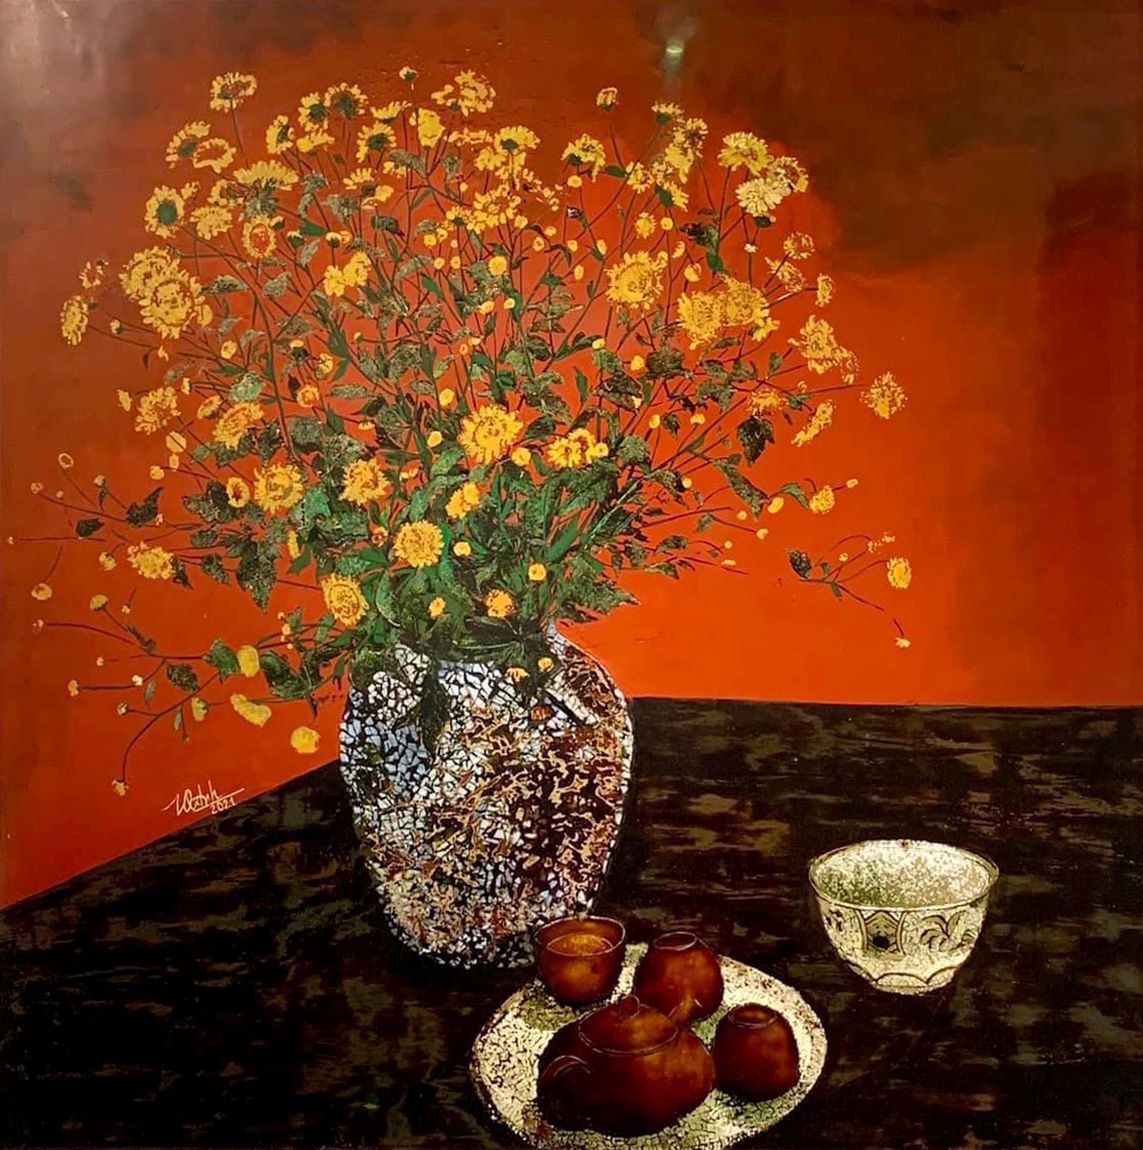 Yellow Daisy - Vietnamese Lacquer Painting Flower by Artist Trinh Que Anh